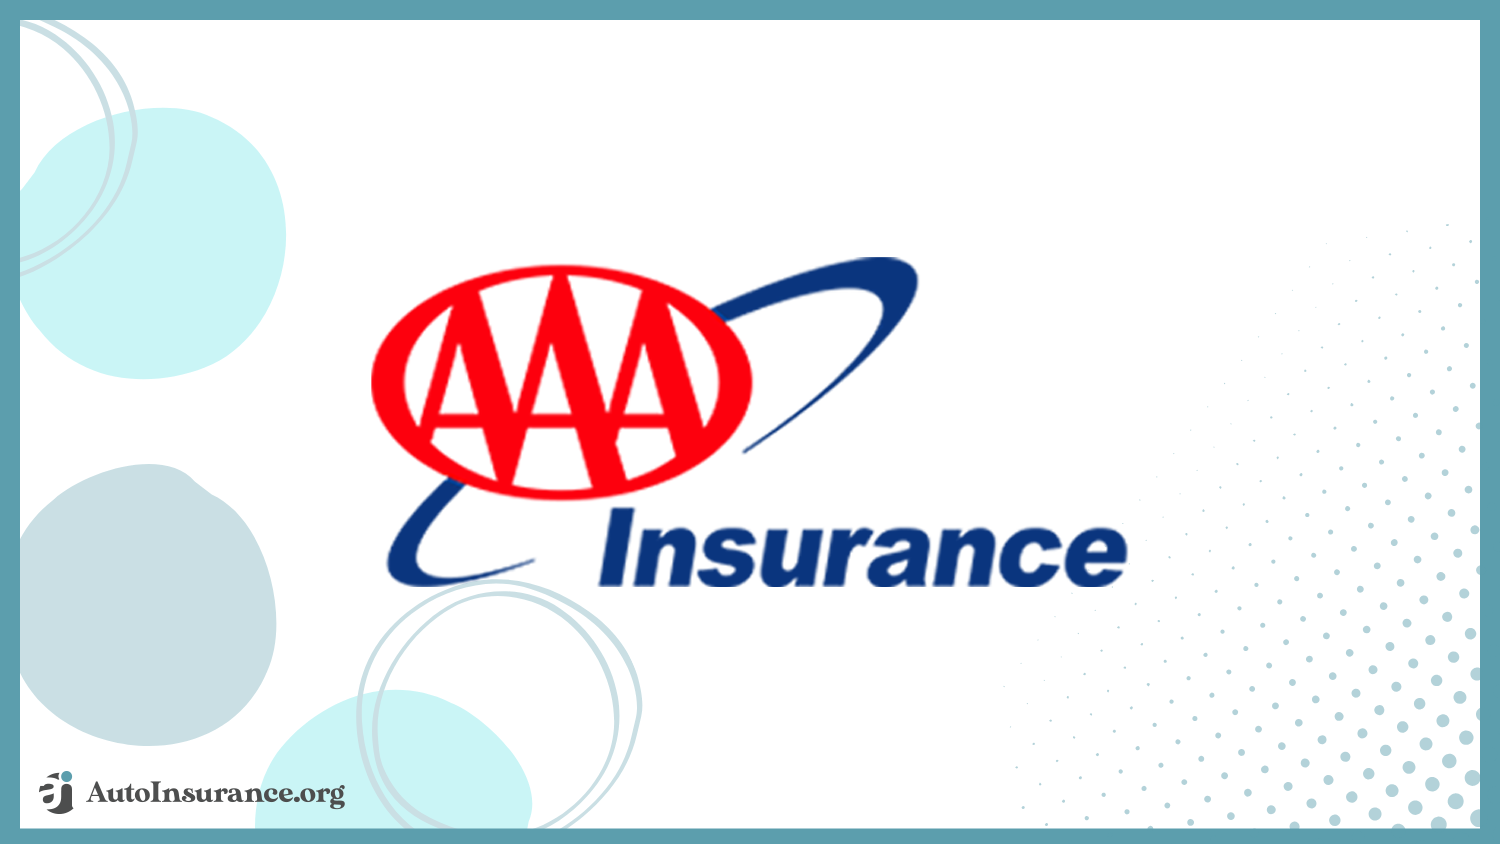 AAA: Best Auto Insurance for Cancer Patients